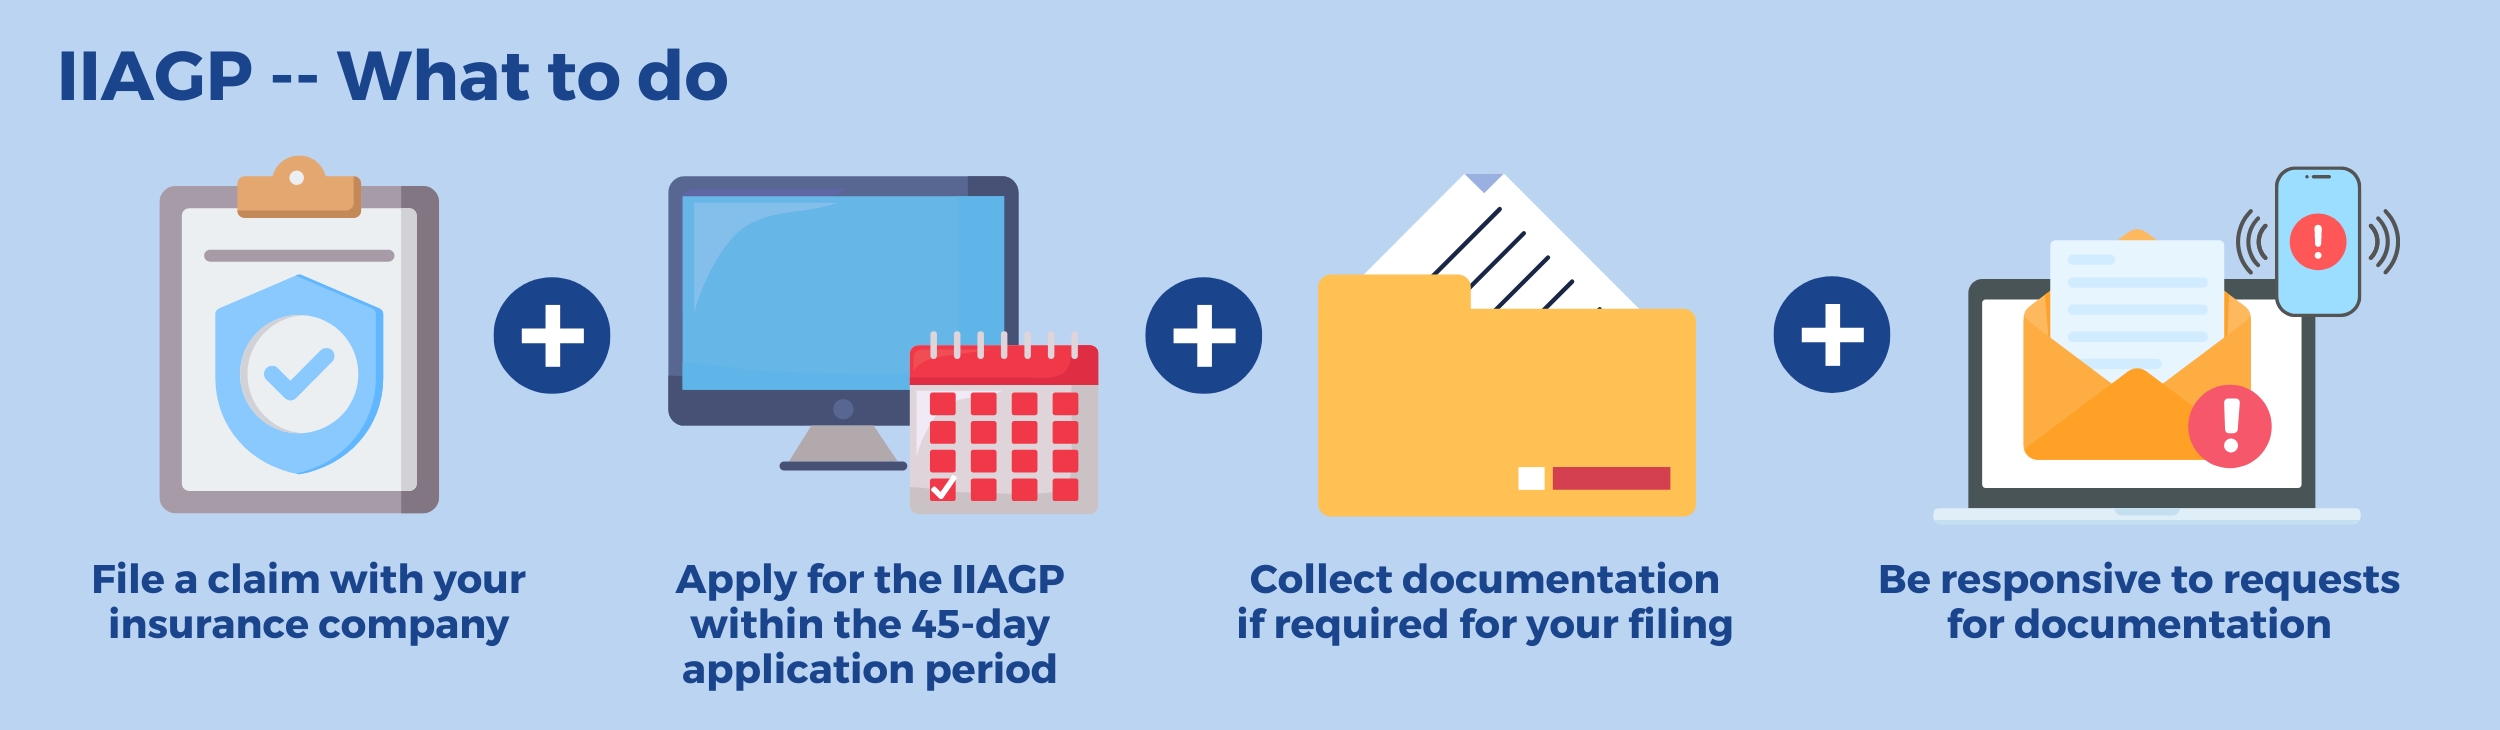 IIAGP--What to do: File a claim with your insurance company + Apply for the IIAGP within the 45-day application period + Collect documentation if required for your filing + Be responsive to requests for documentation